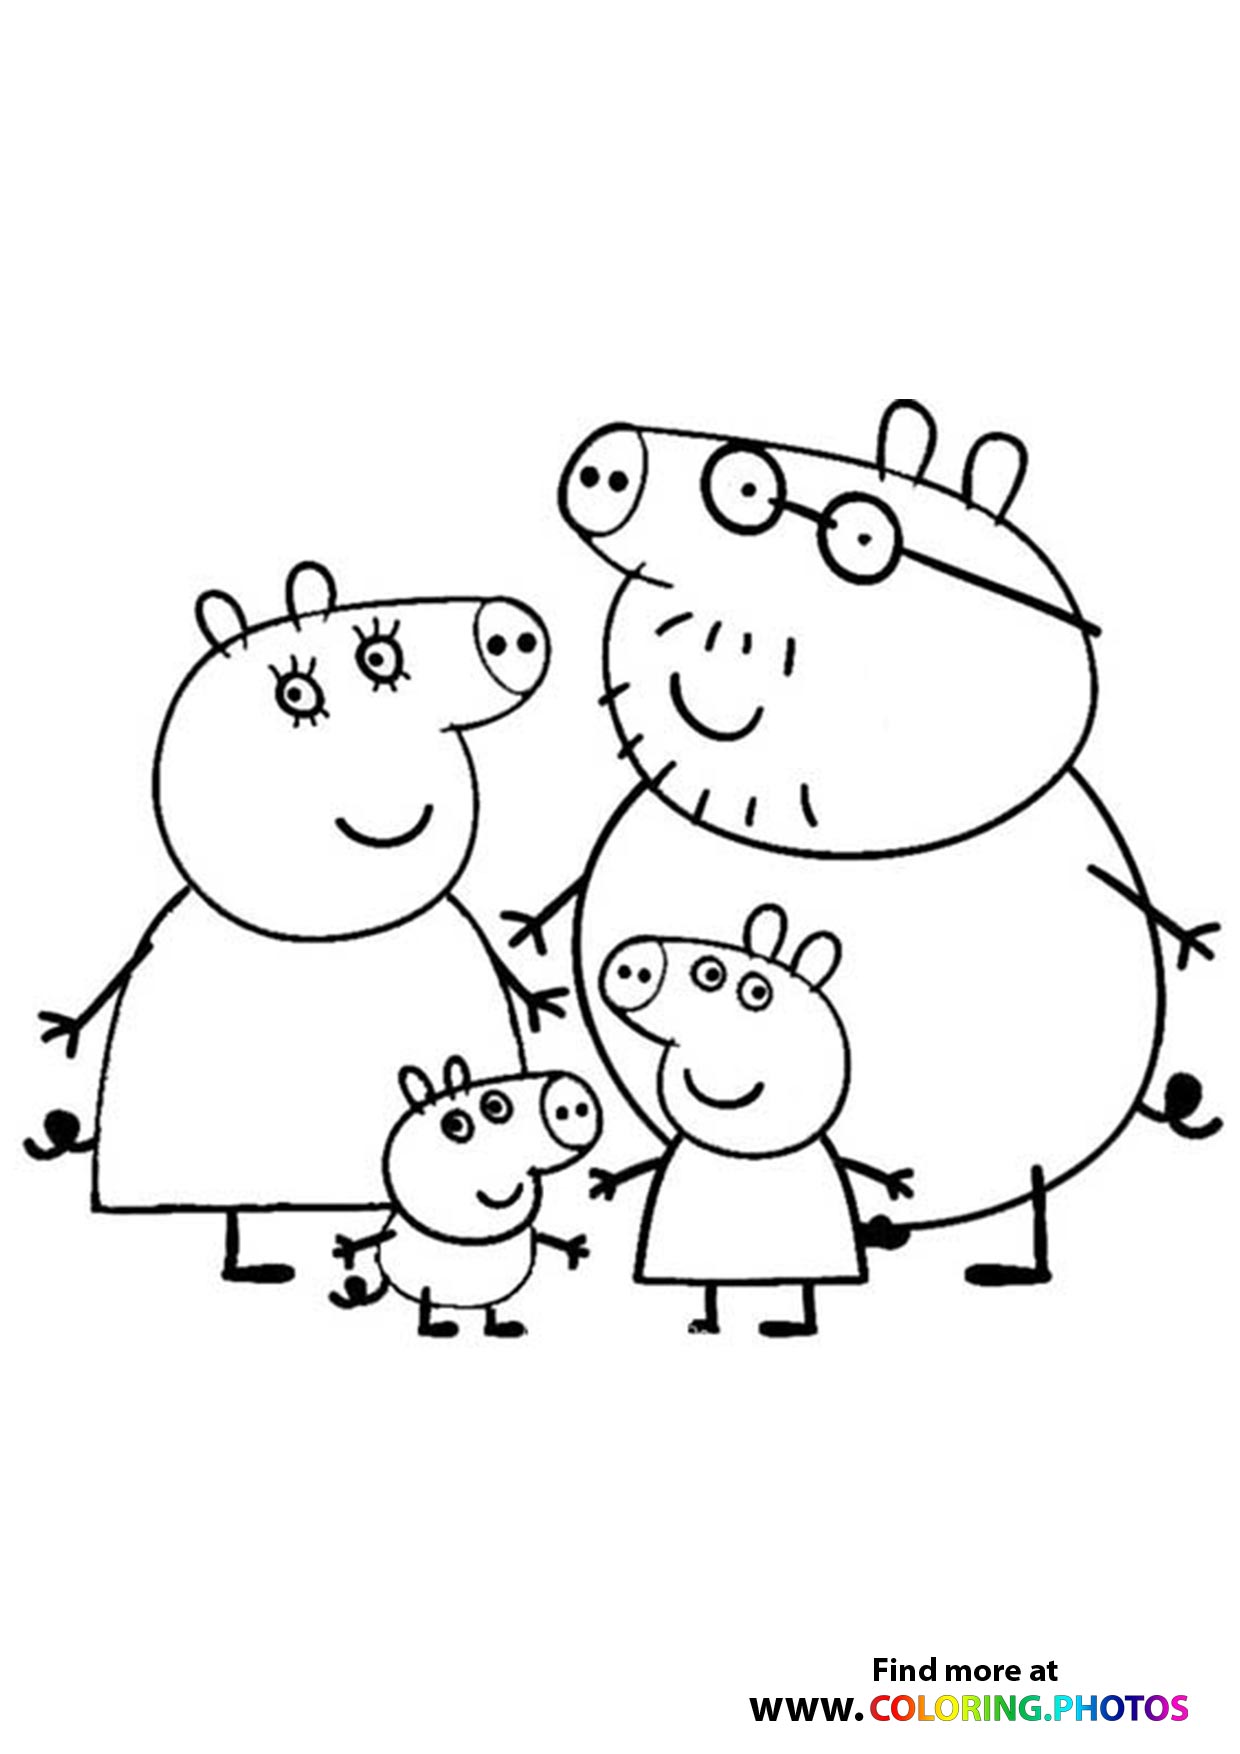 Peppa Pig - Coloring Pages for kids | Free and easy print or download